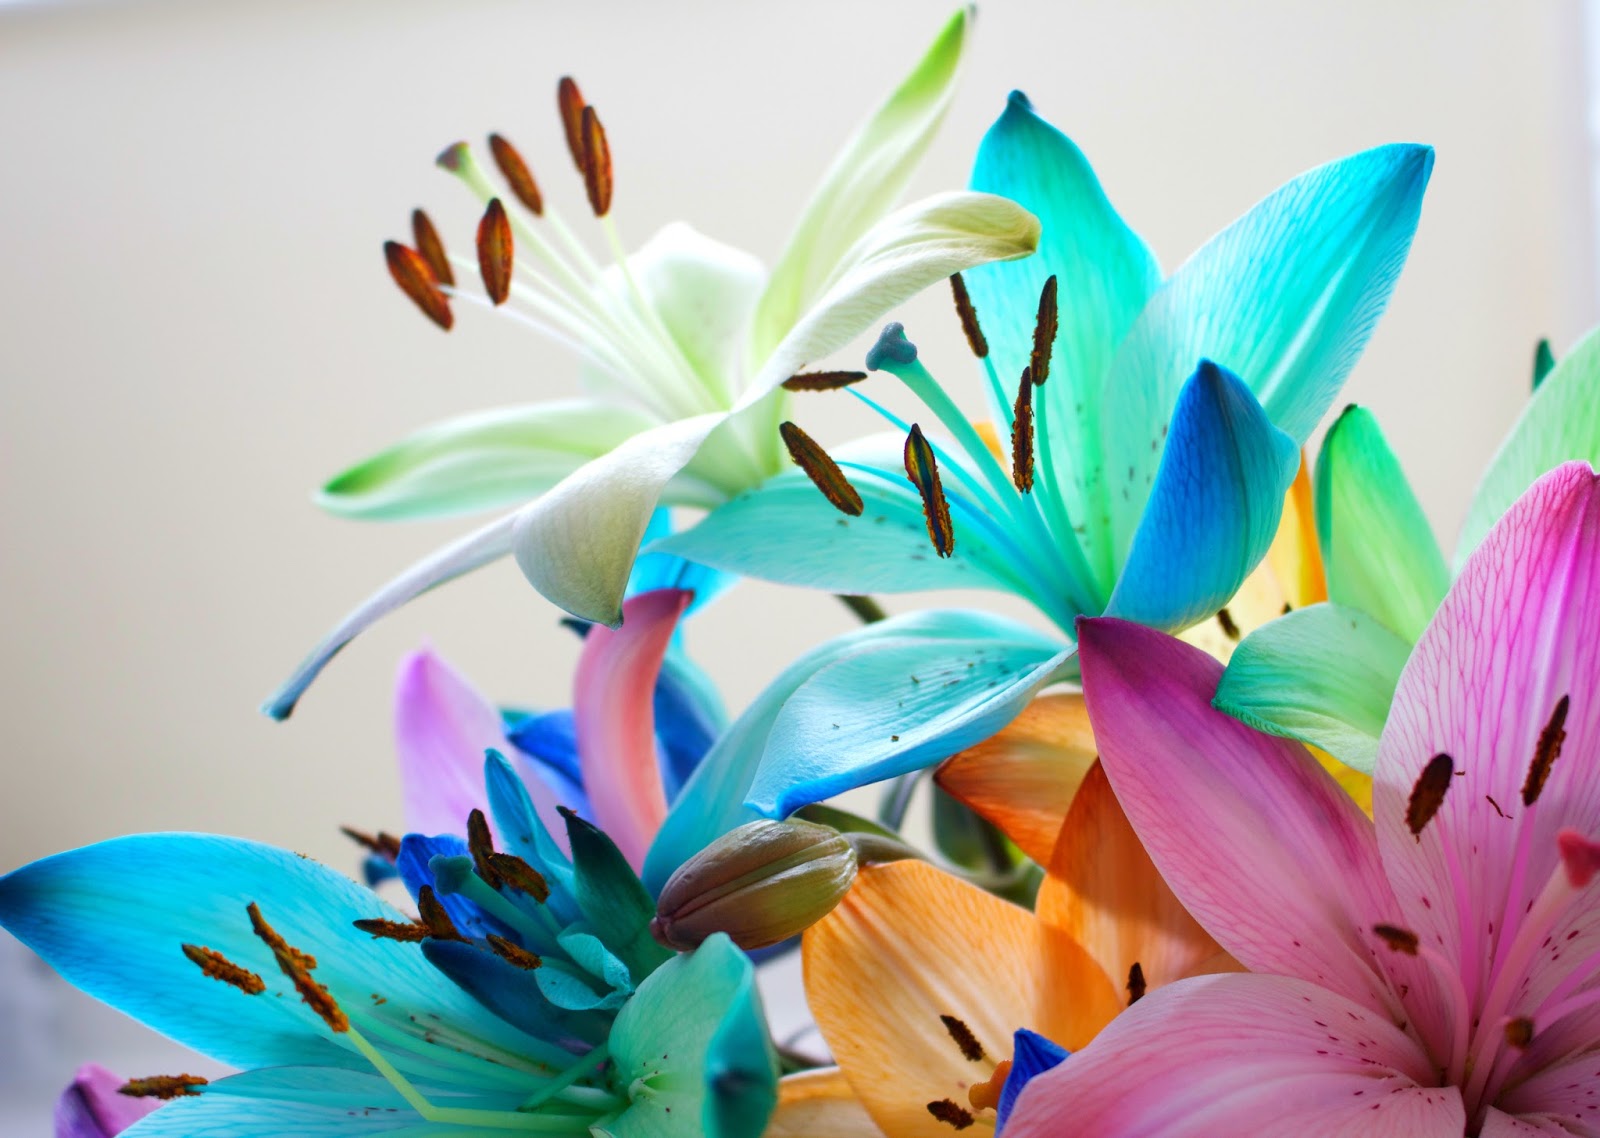 Rainbow Lilies. Blue lilies. Purple lilies. Orange lilies. Green lilies. Multi coloured lilies. spring lilies. spring flowers. Blossoming Gifts flowers. Blossom gifts rainbow lilies. Giveaway, competition. Blog competition. Blog giveaway. Product review. Flower bouquet. 100 Ways to 30, Uk life and style blog, brands, collaboration. Lily pollen.  Canon 700d photos